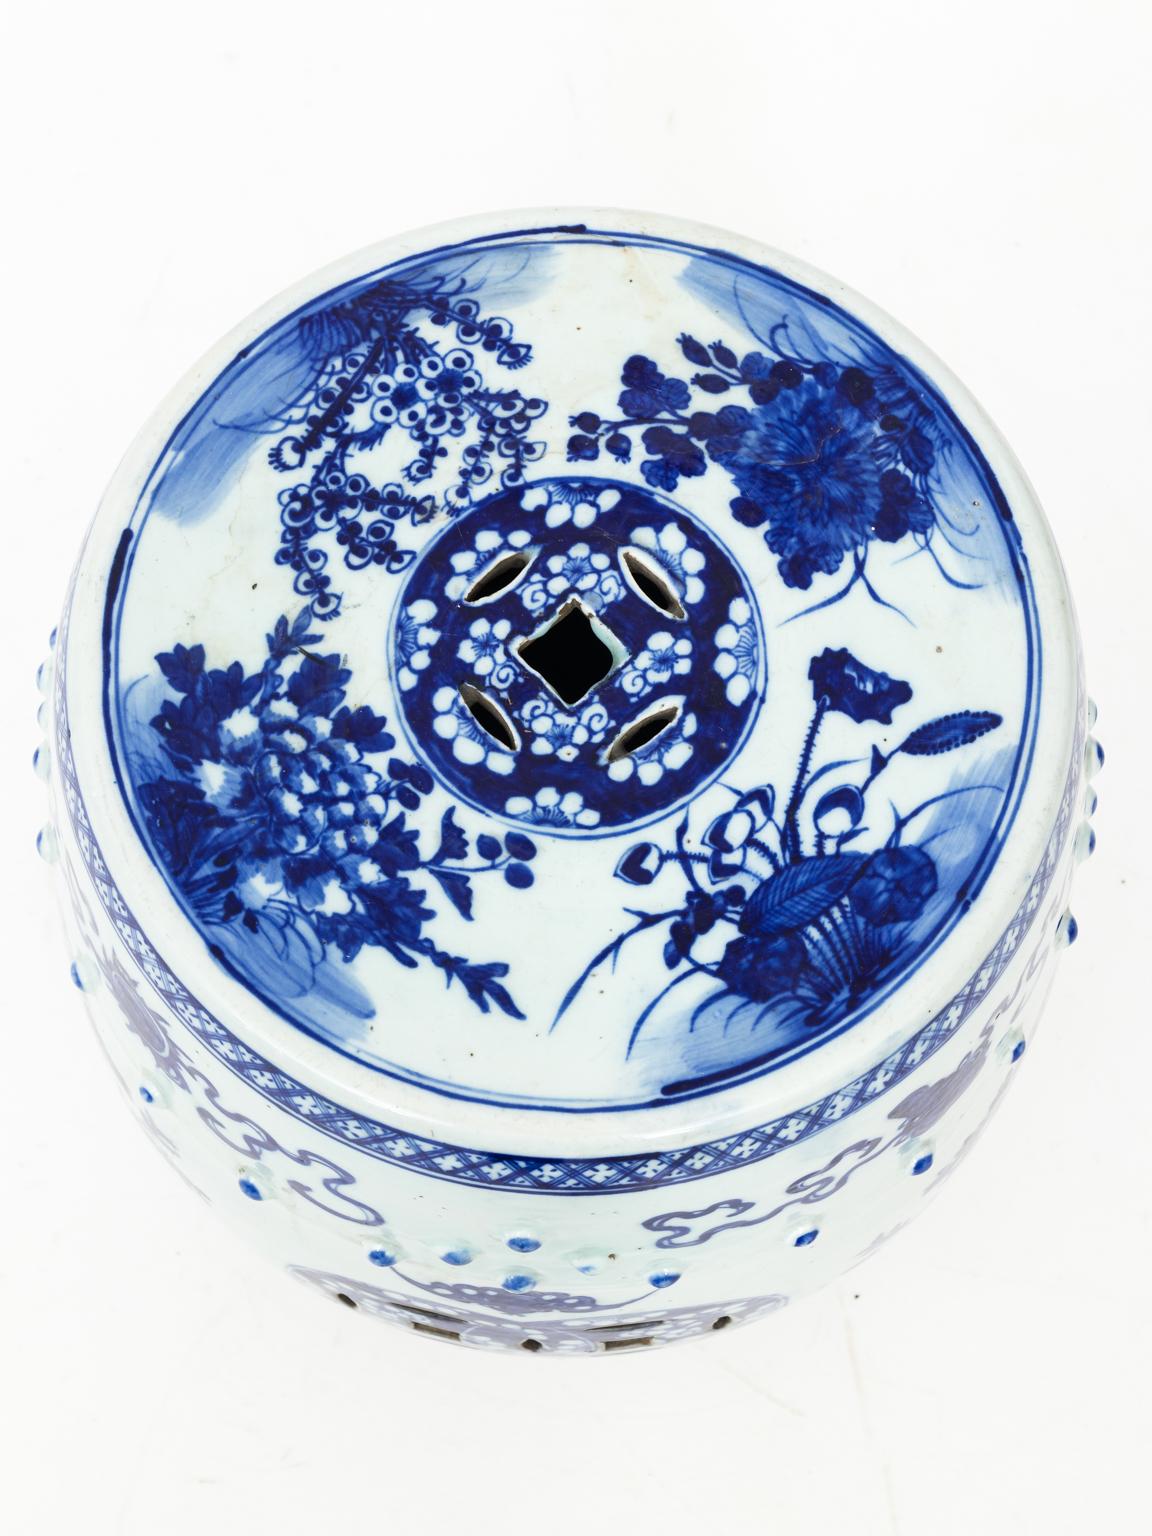 Painted Blue and White Chinese Porcelain Garden Seat